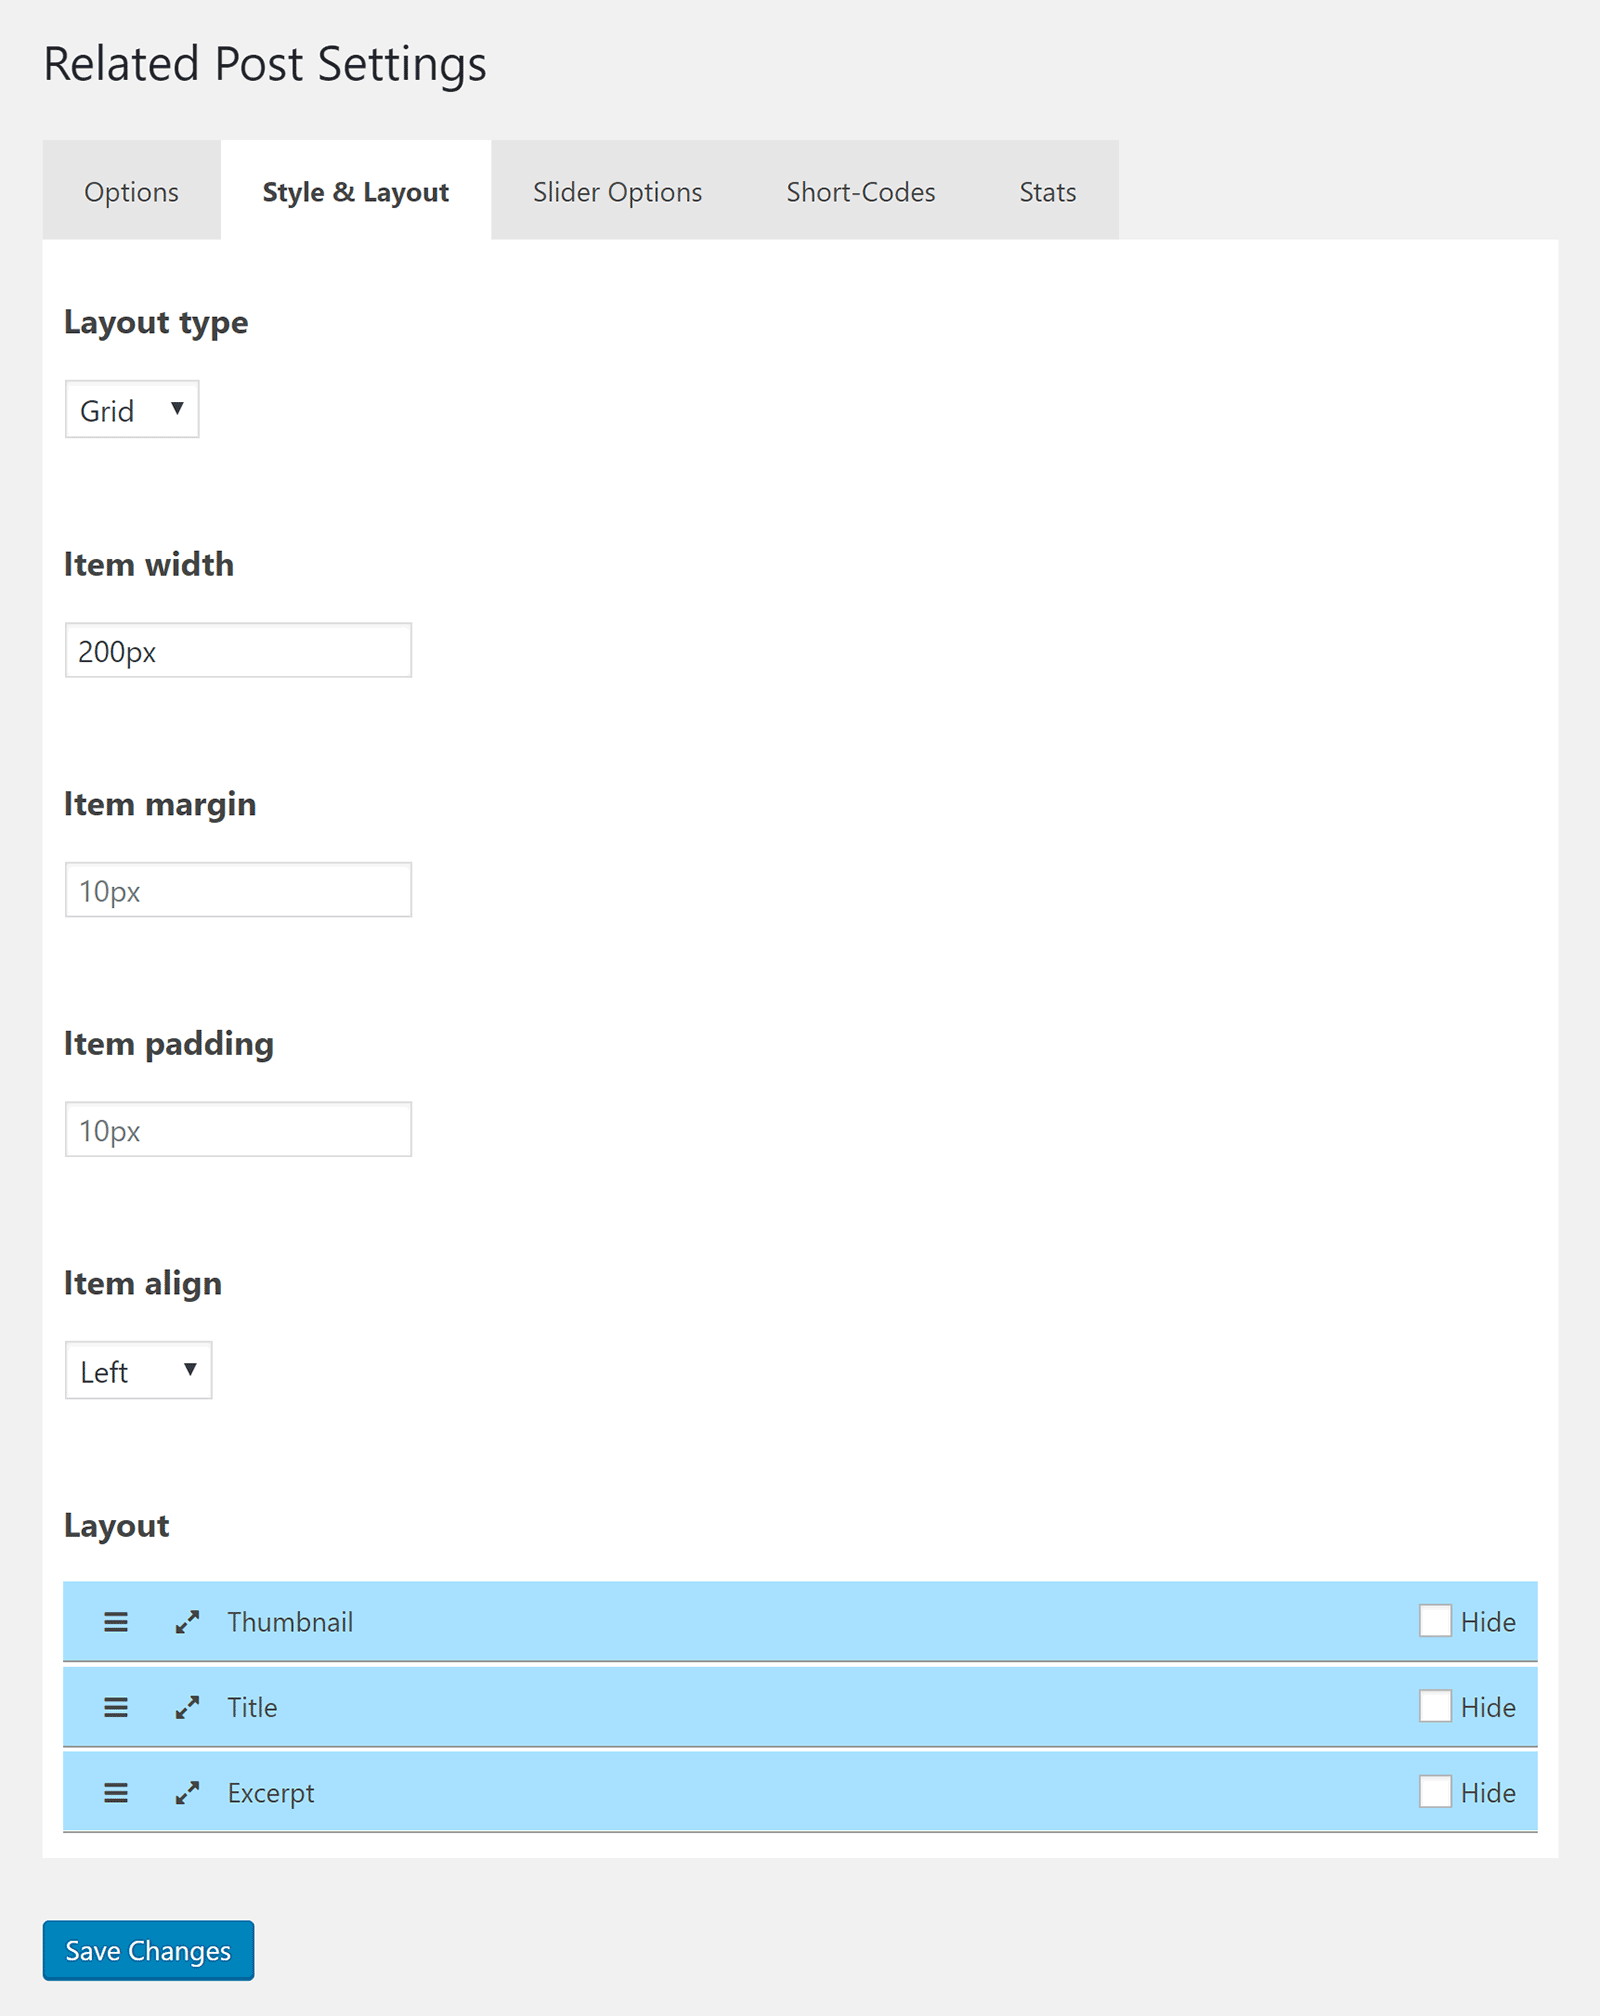 Related Post Style Settings